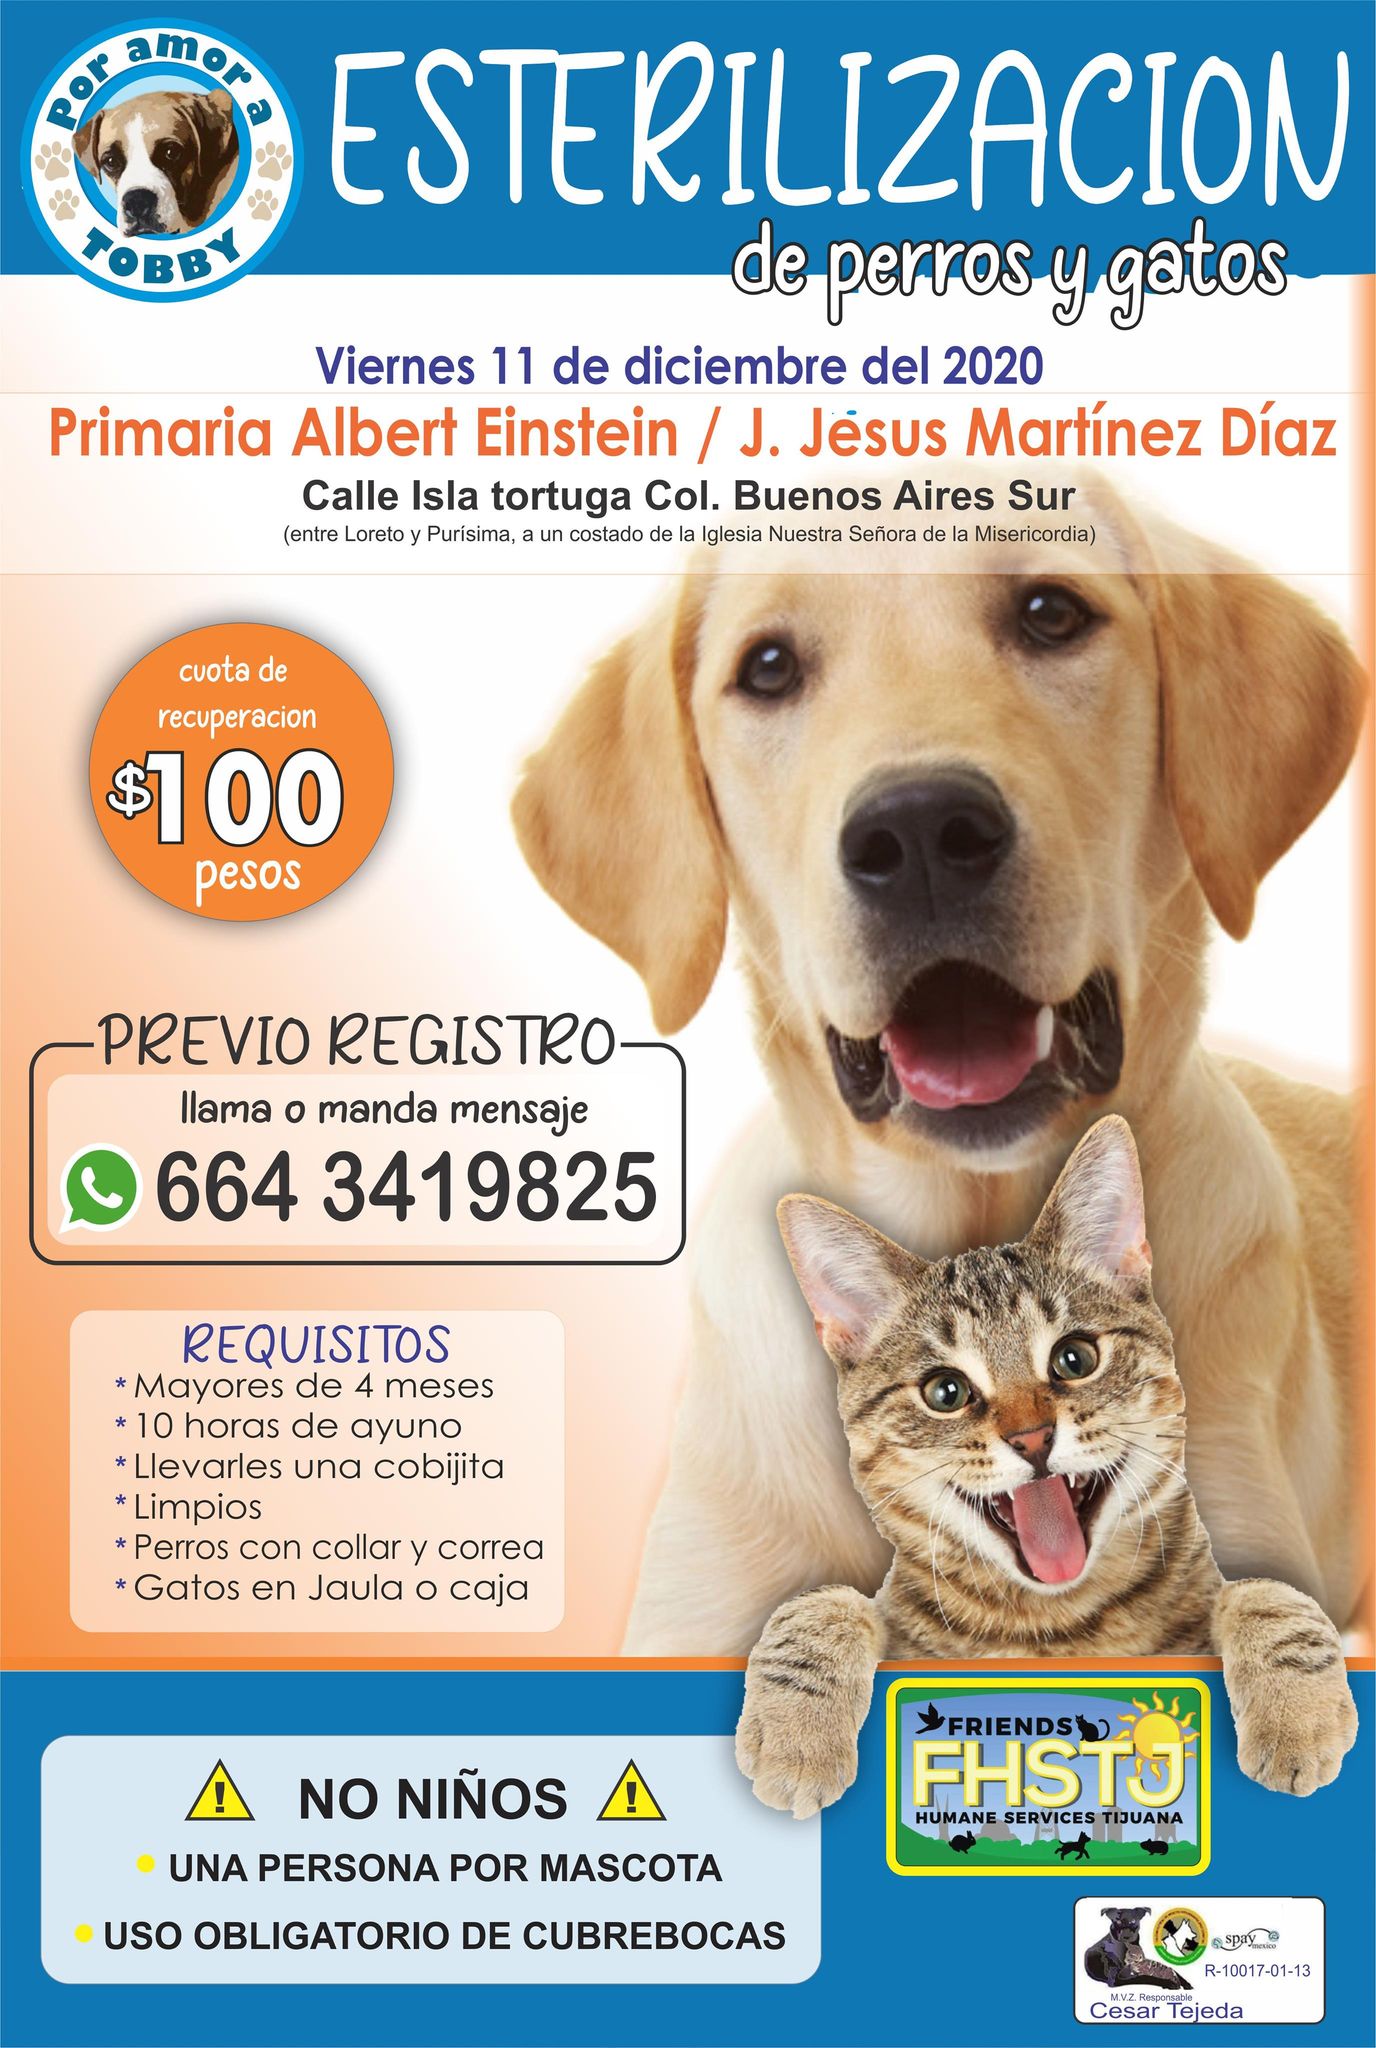 UPCOMING SPAY & NEUTER EVENT - Friends of Humane Services Tijuana